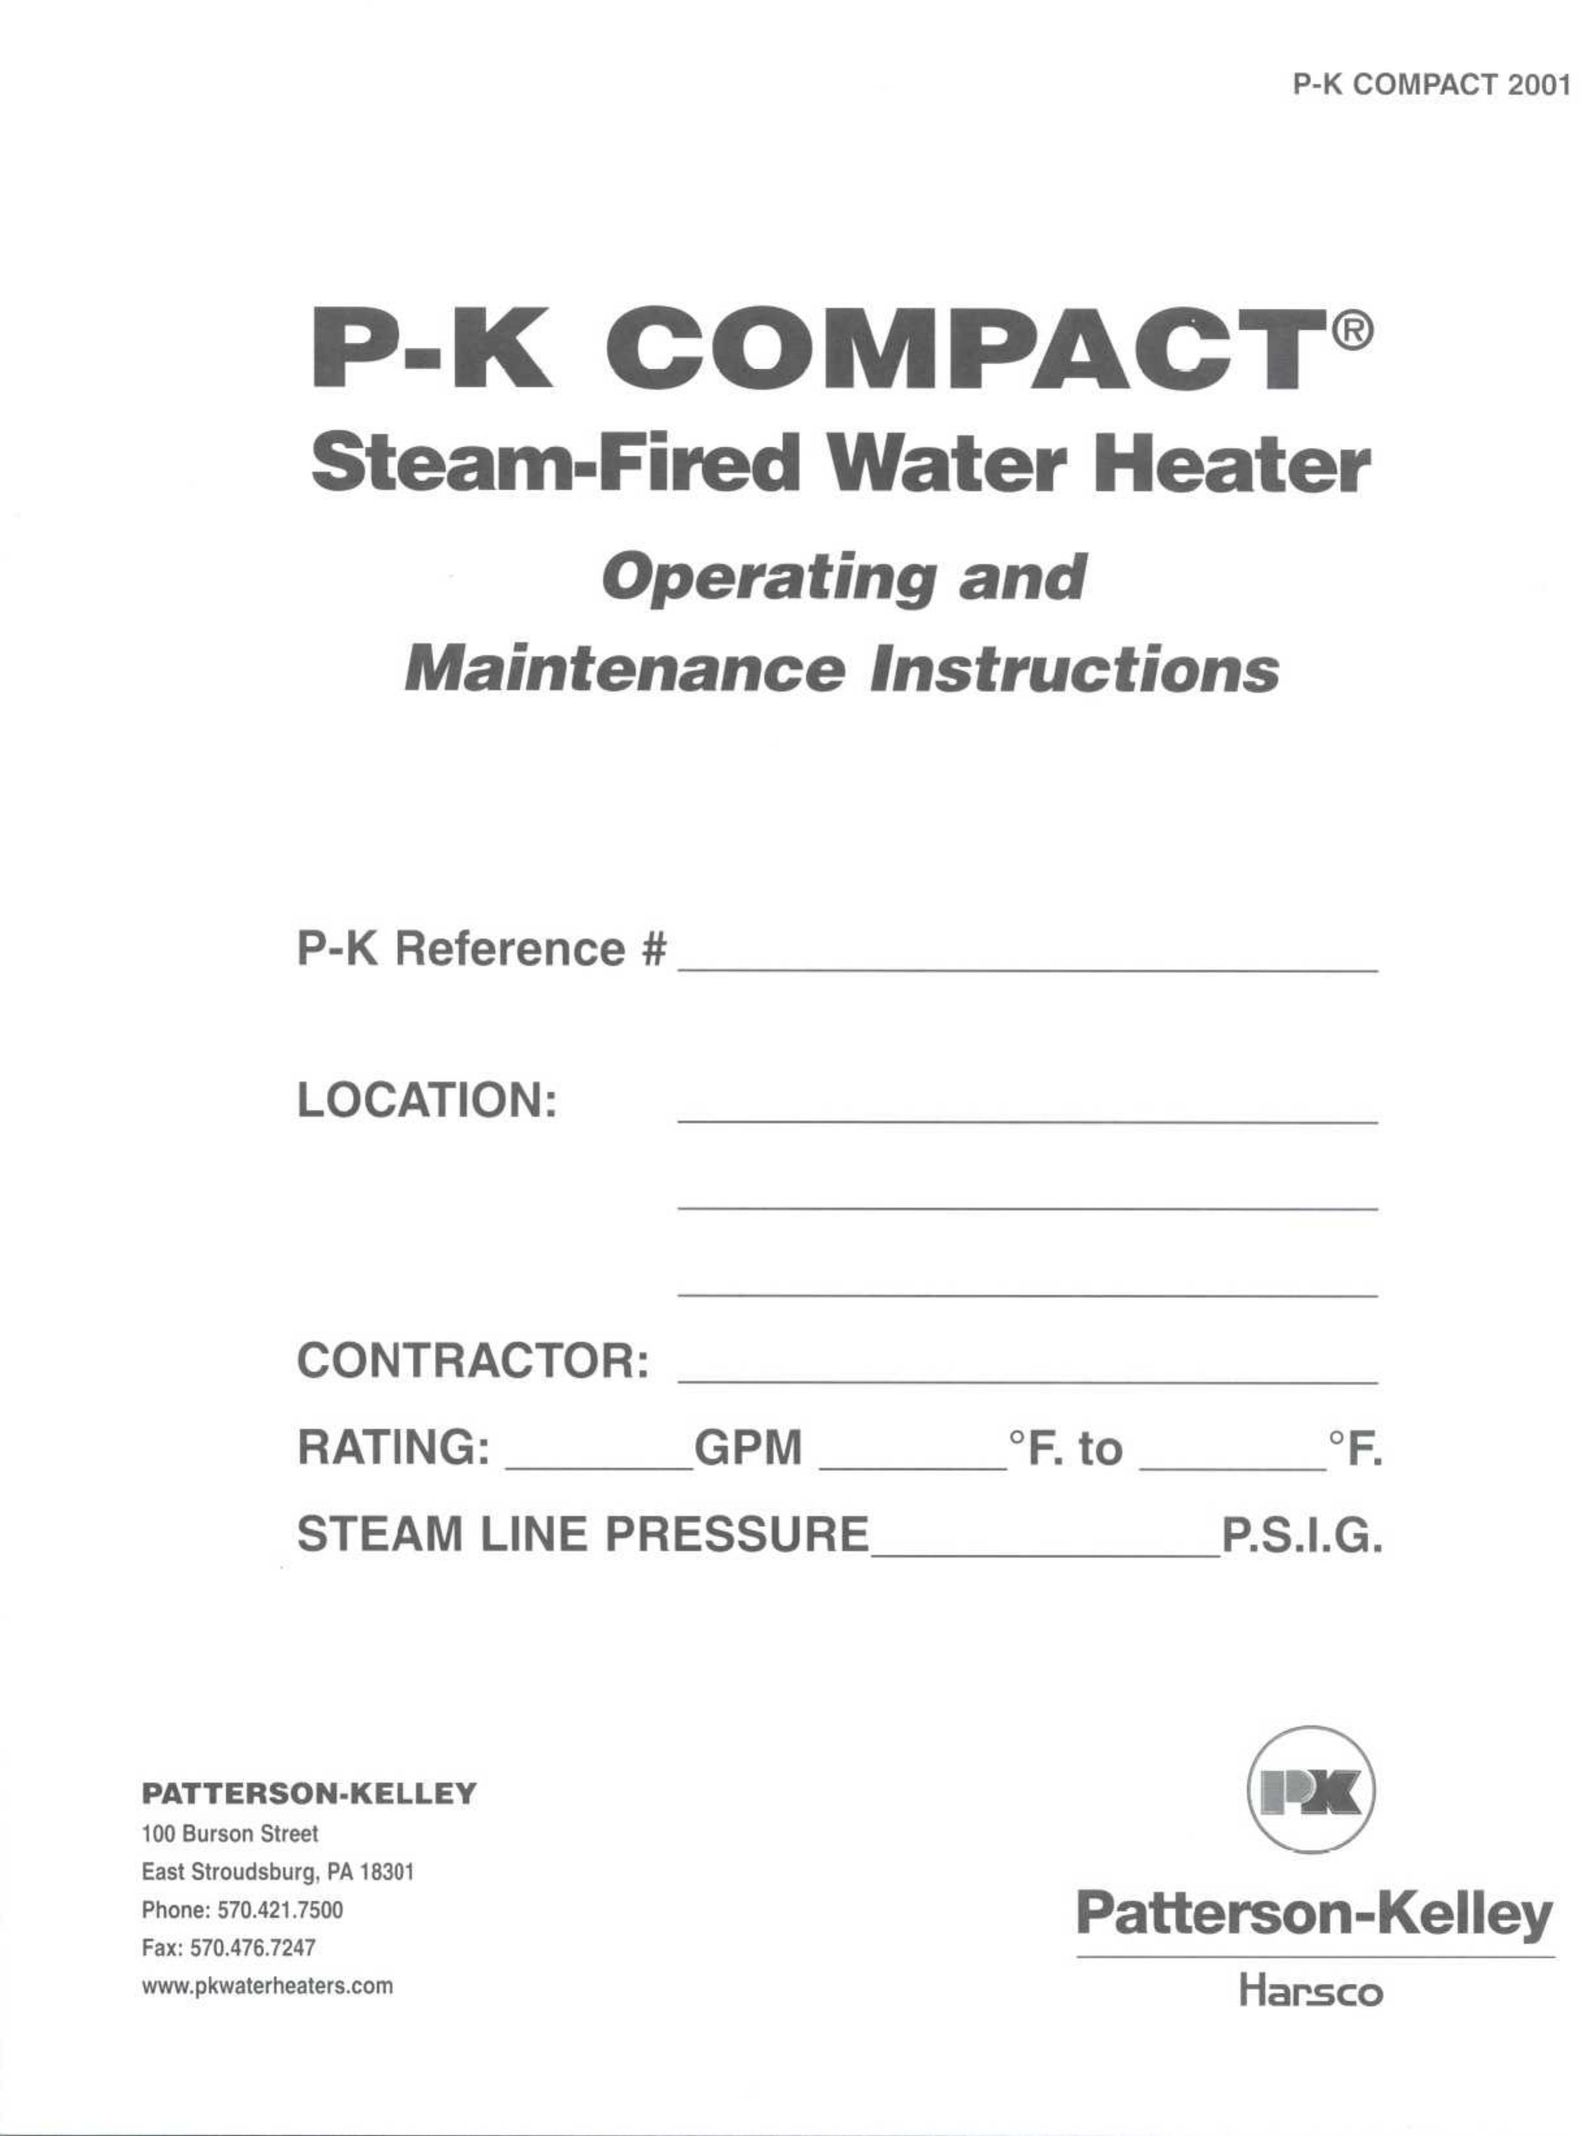 Patterson-Kelley P-K Compact Water Heater User Manual